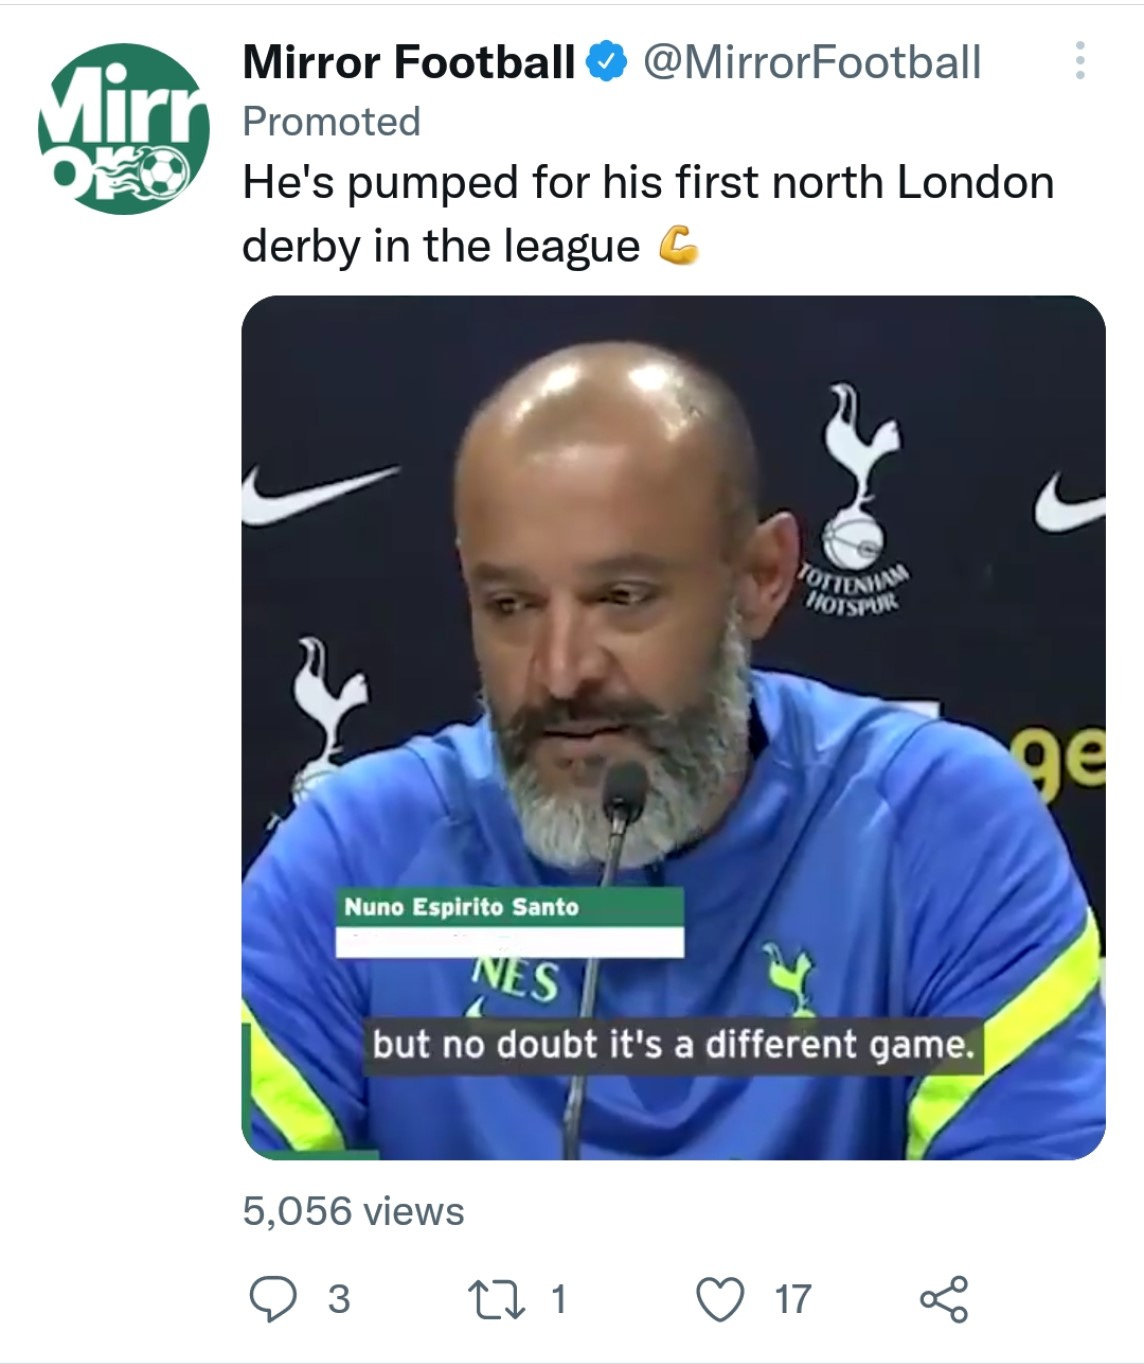 Promoted tweet from Mirror Football, showing Spurs manager Nuno Espirito Santo “pumped for his first north London derby in the league”. WE HAVE TO GO BACK TO THE WEEKEND, MARTY.